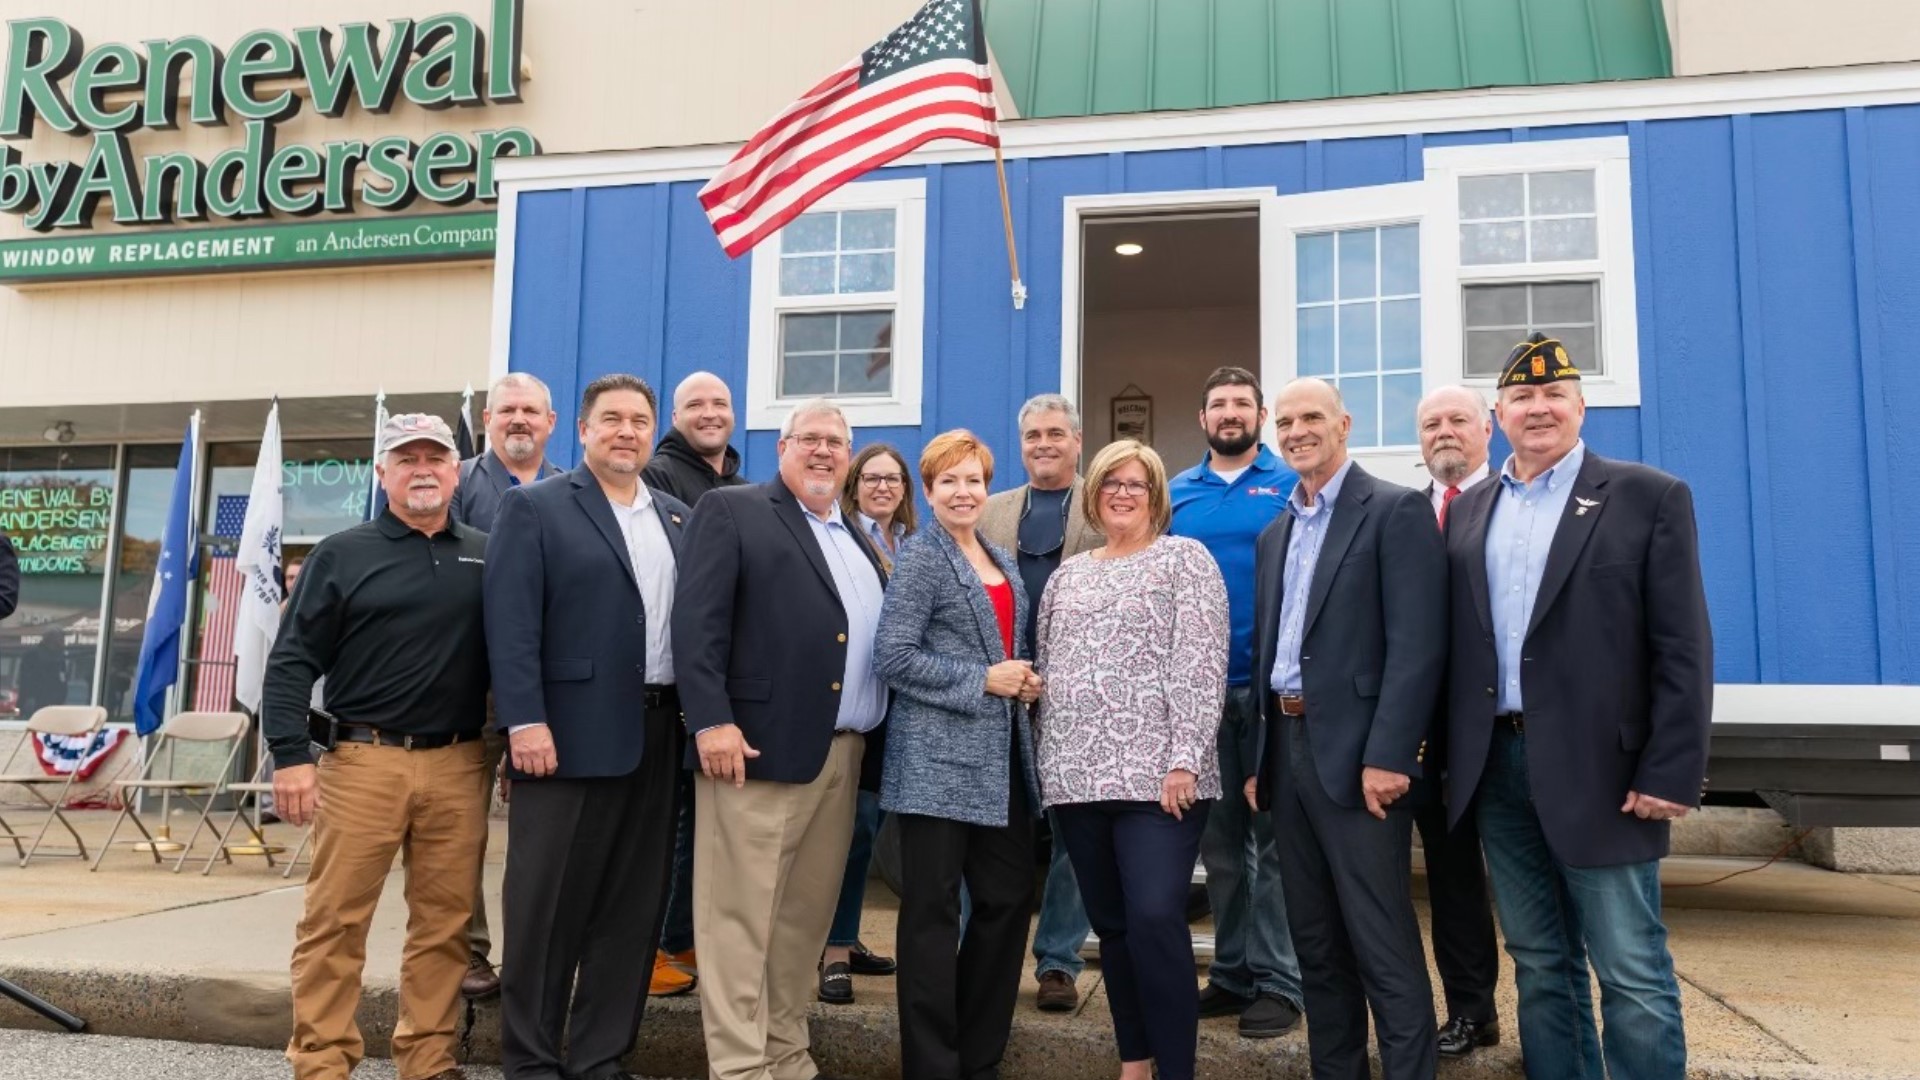 With the material donations, 15 tiny homes for veterans experiencing homelessness will be built along the Susquehanna River in South Harrisburg.